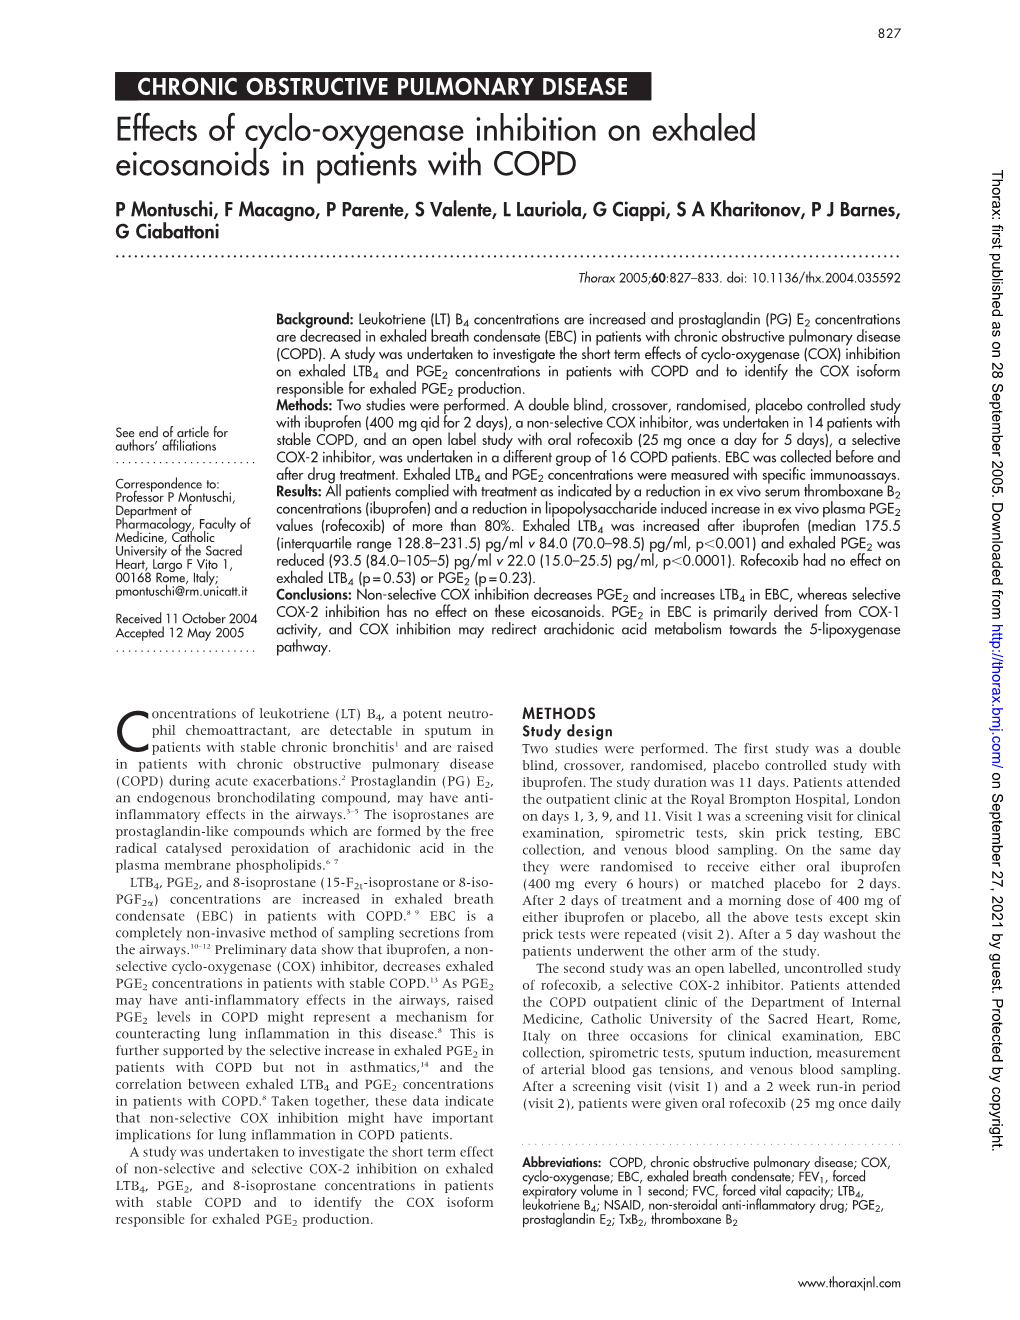 Effects of Cyclo-Oxygenase Inhibition on Exhaled Eicosanoids in Patients with COPD Thorax: First Published As on 28 September 2005